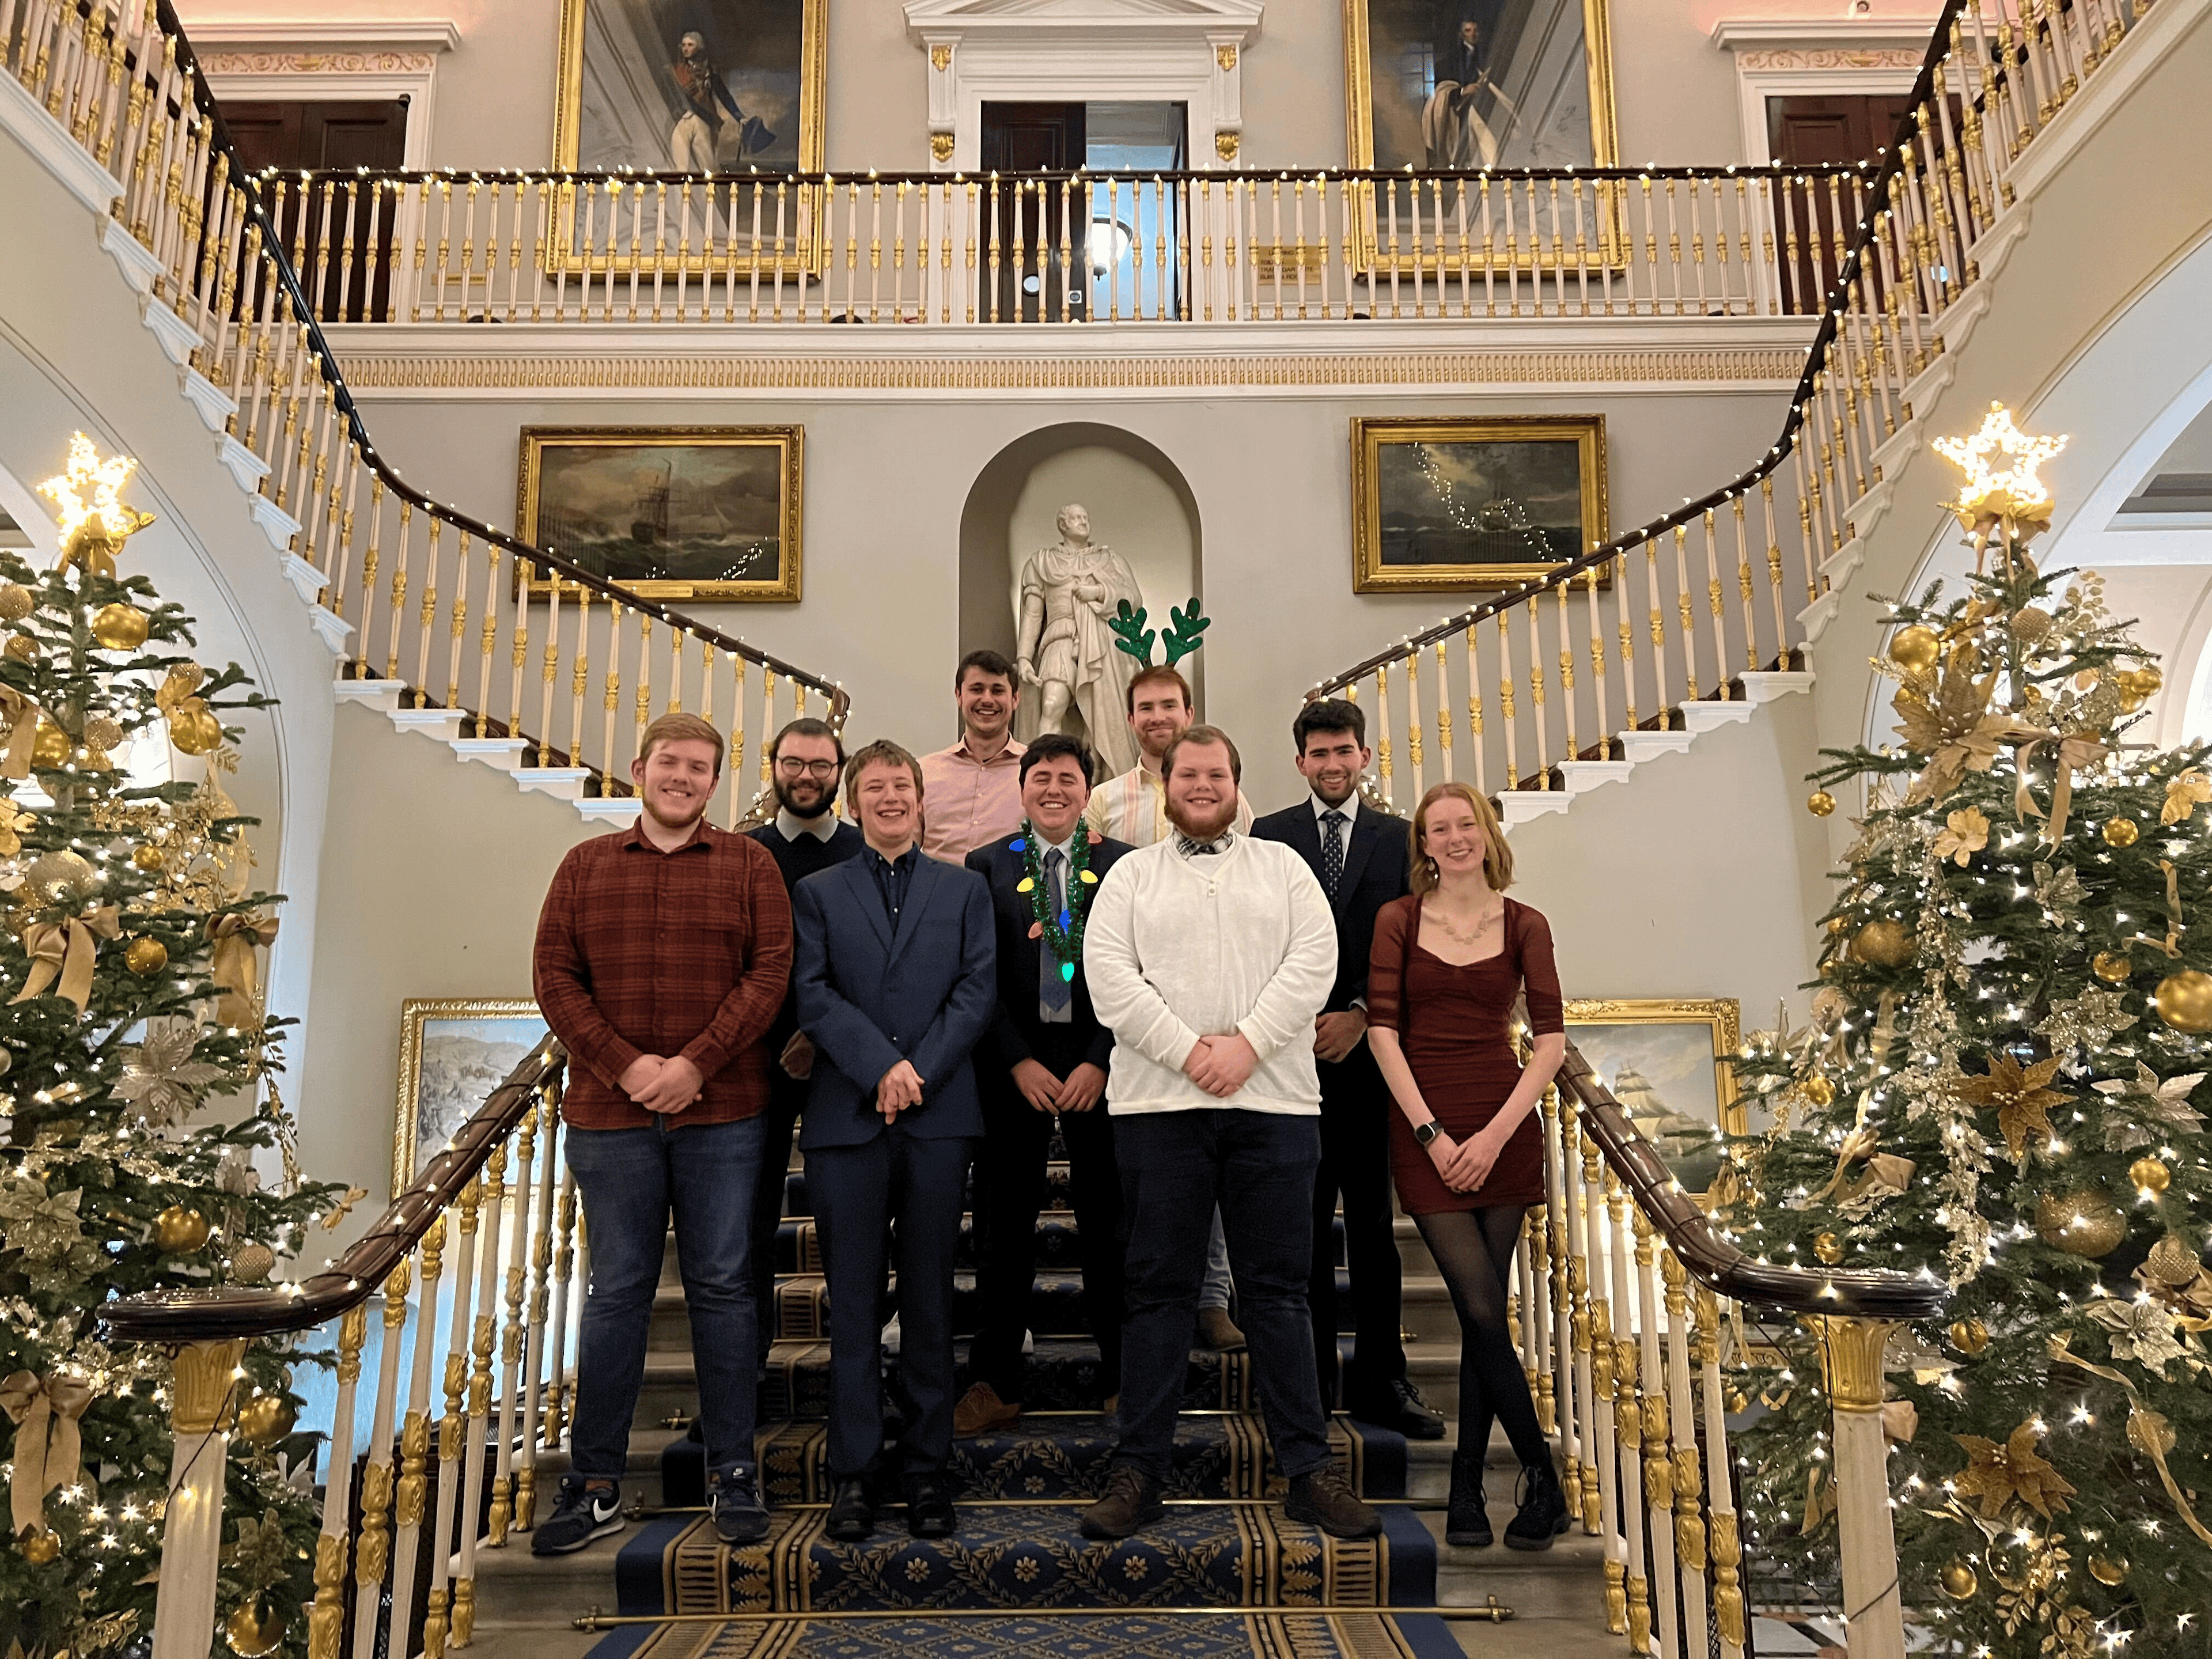 Jamescape staff at the IoD for their 2022 Christmas Meal